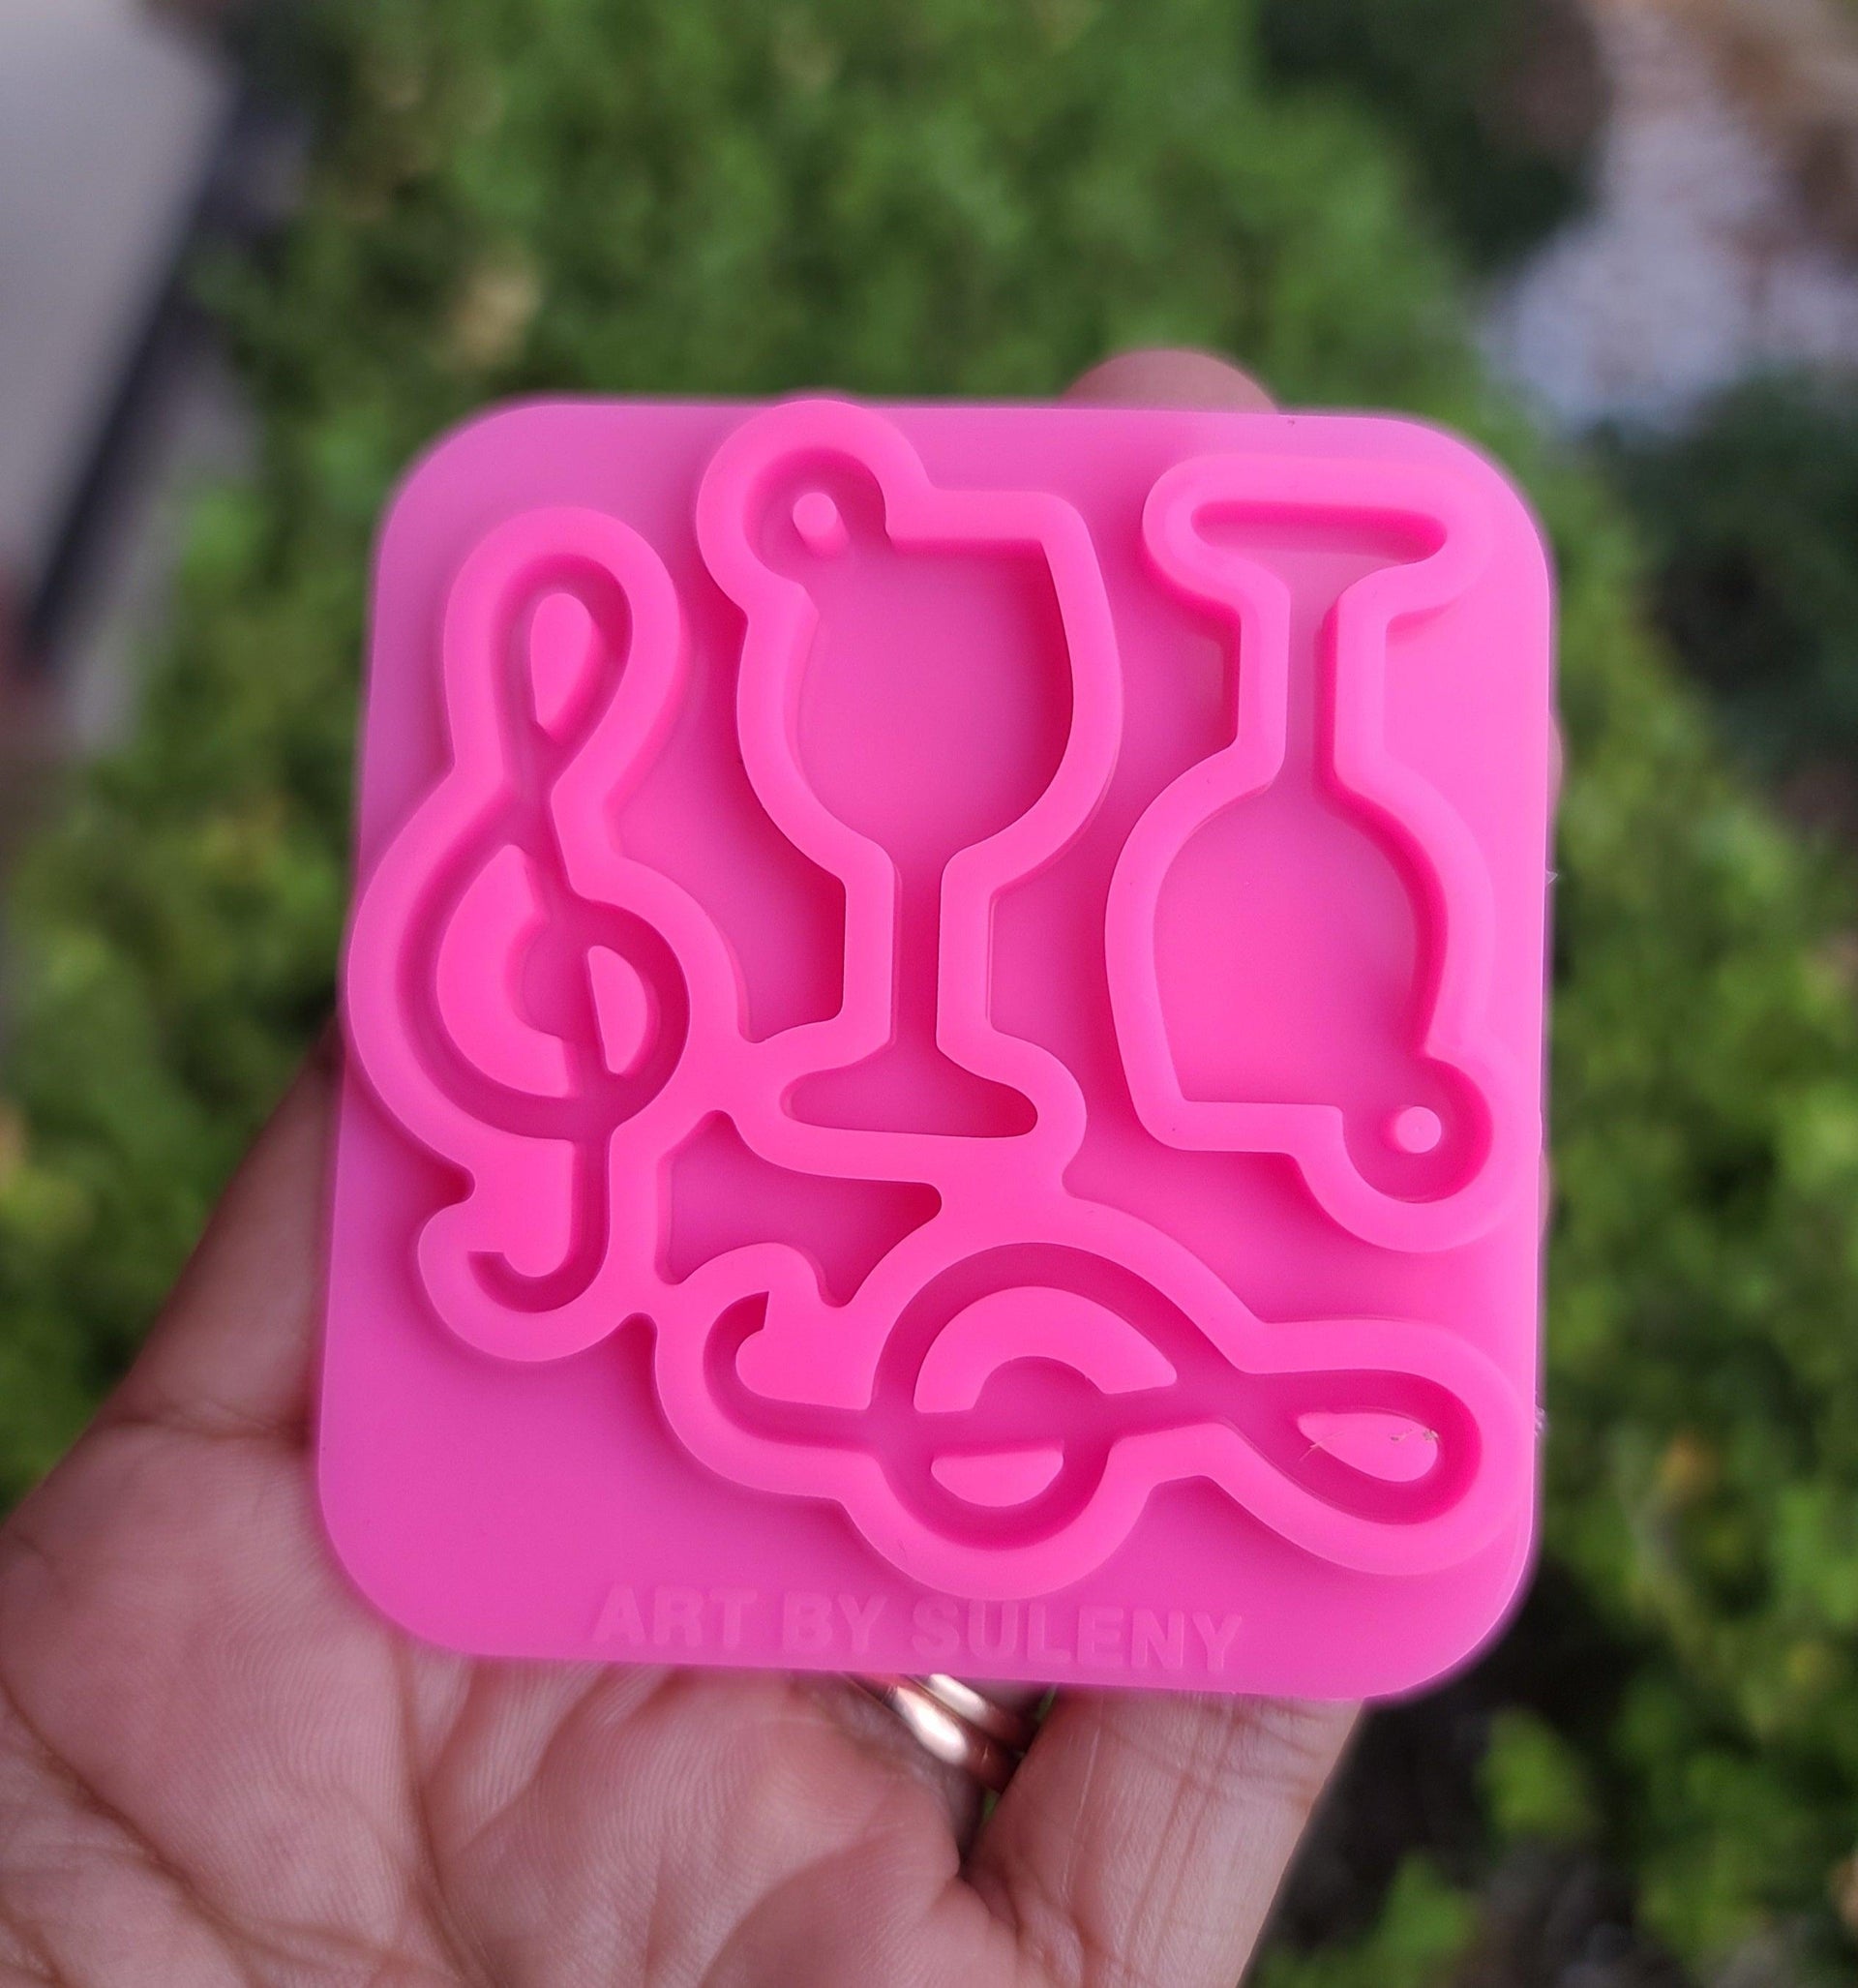 Mold for Resin - Music Symbol Mold - Treble Clef Mold - Wine Glass Mold for Earrings - Resin Mold - Treble Mold - Mold for Epoxy Resin - Art By Suleny Craft Store LLC